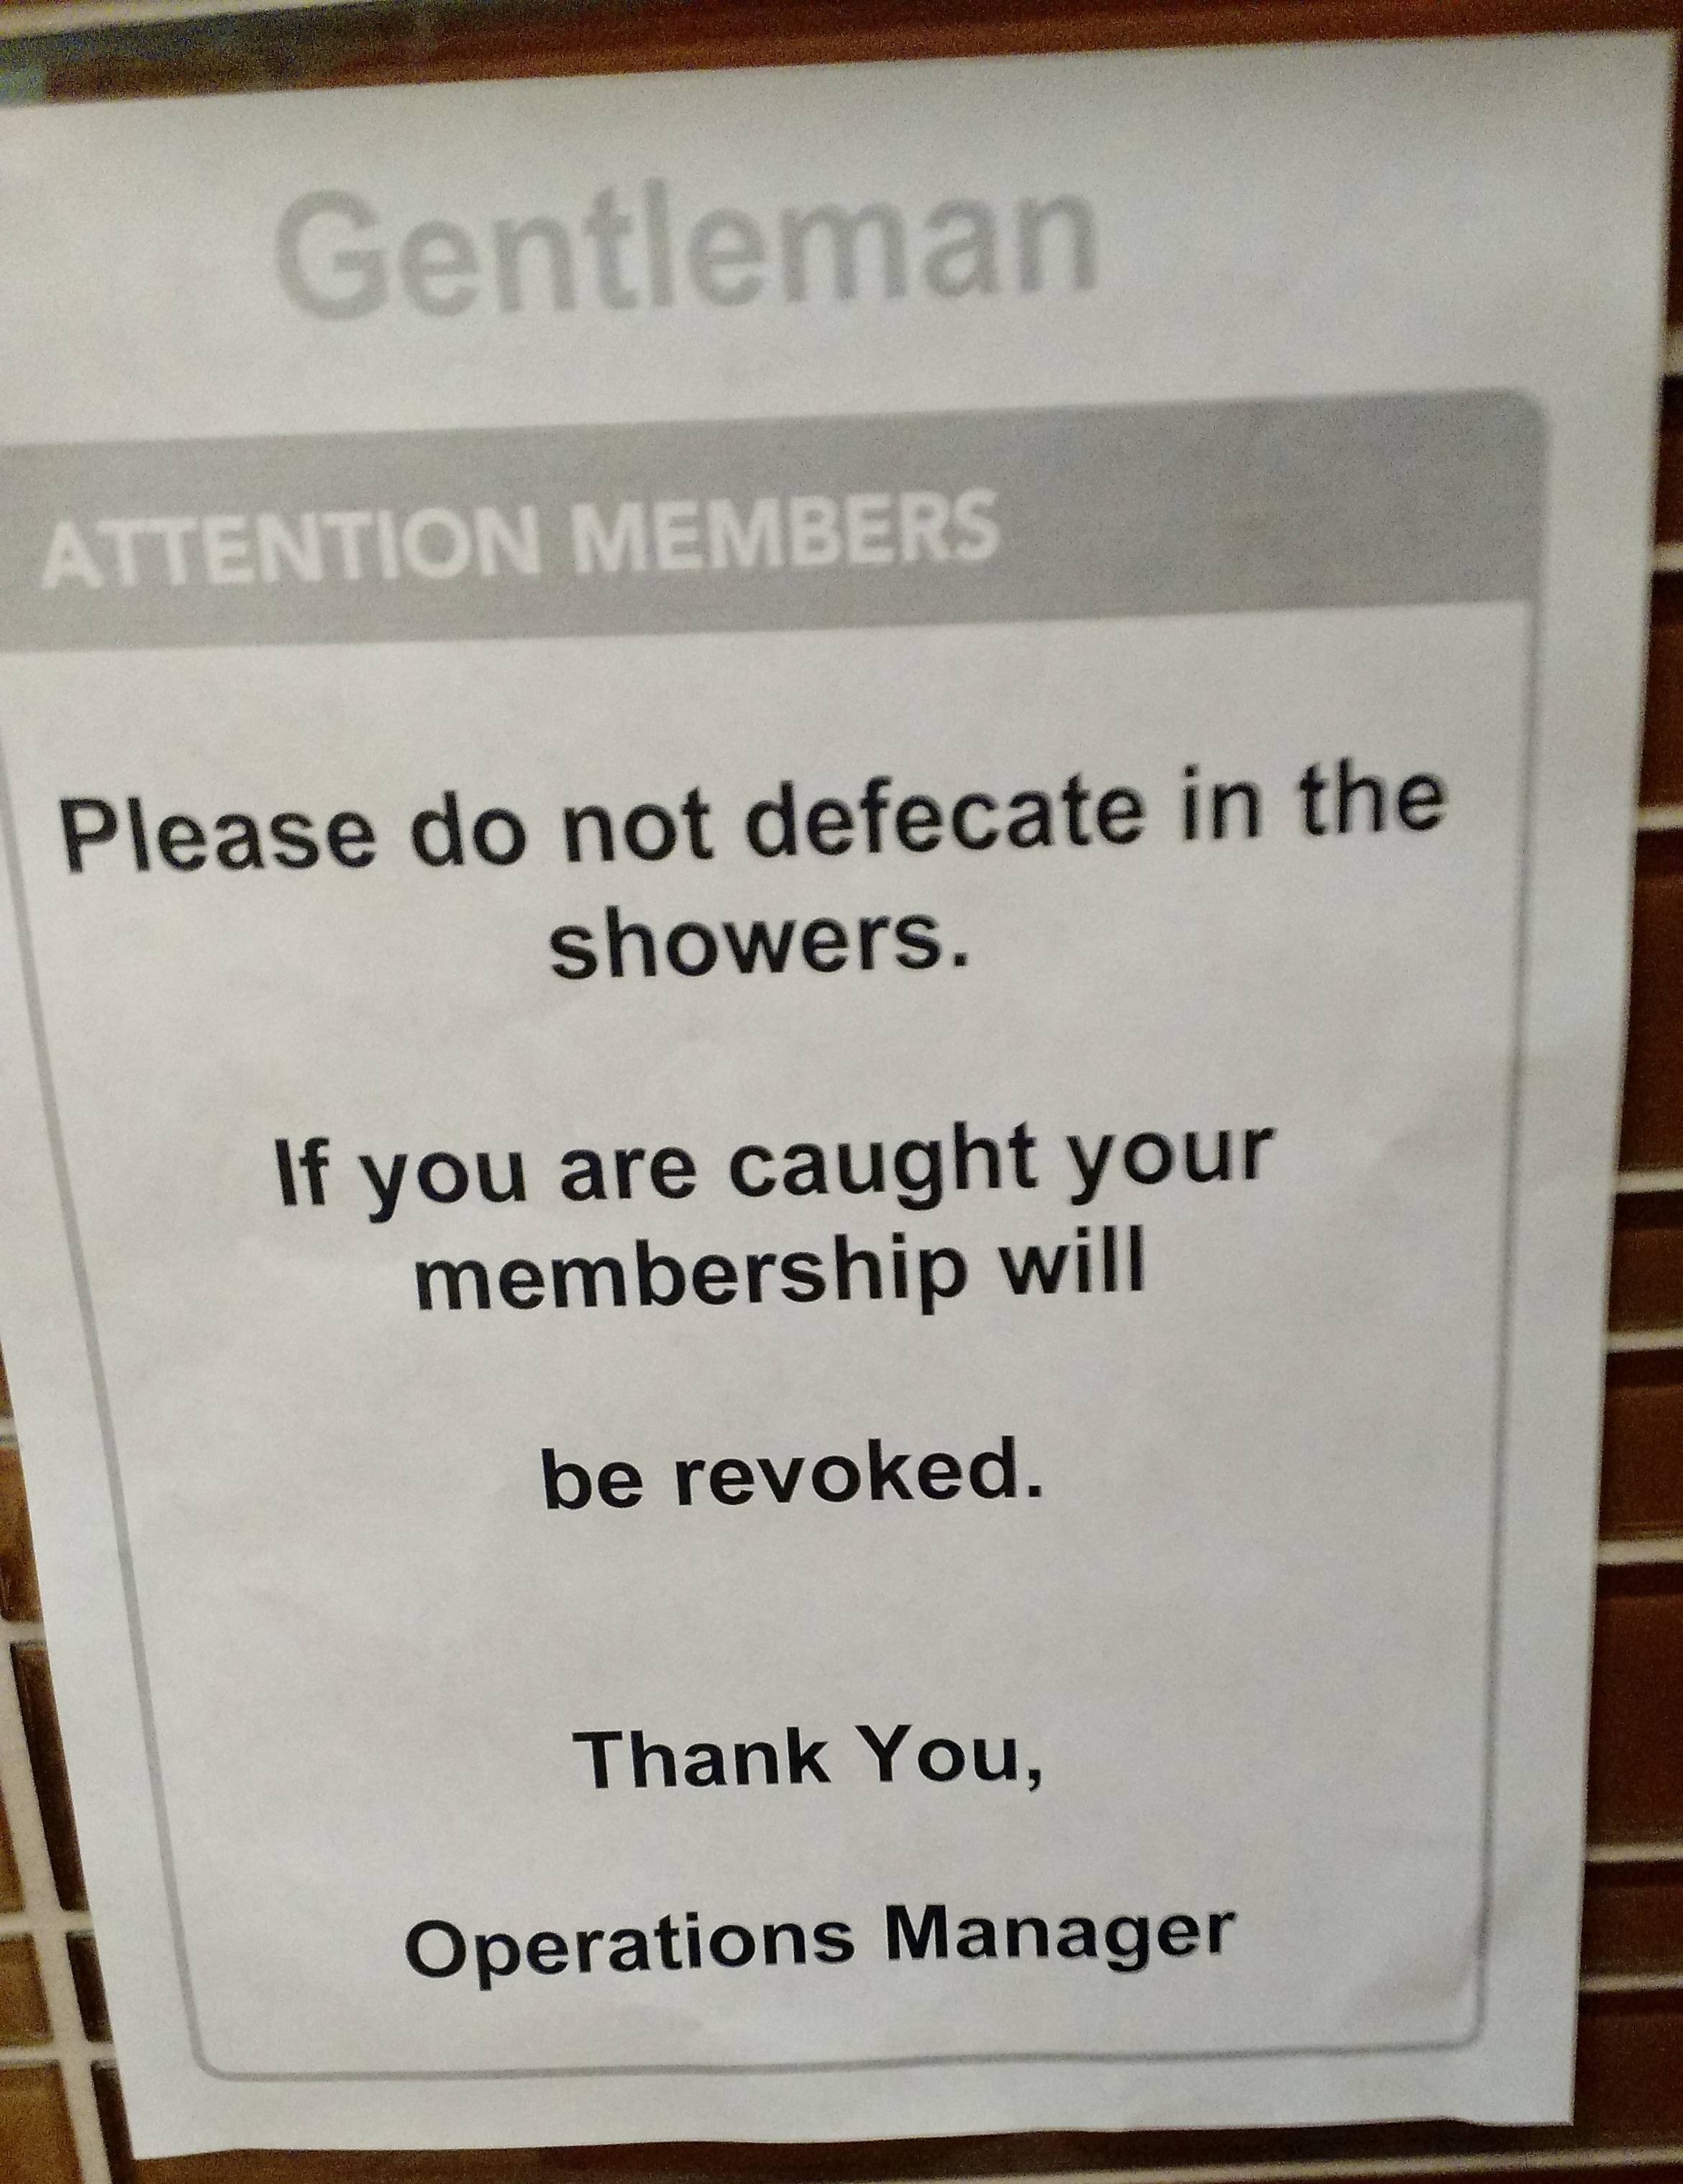 creepy notes - Gentleman Attention Members Please do not defecate in the showers. If you are caught your membership will be revoked. Thank You, Operations Manager